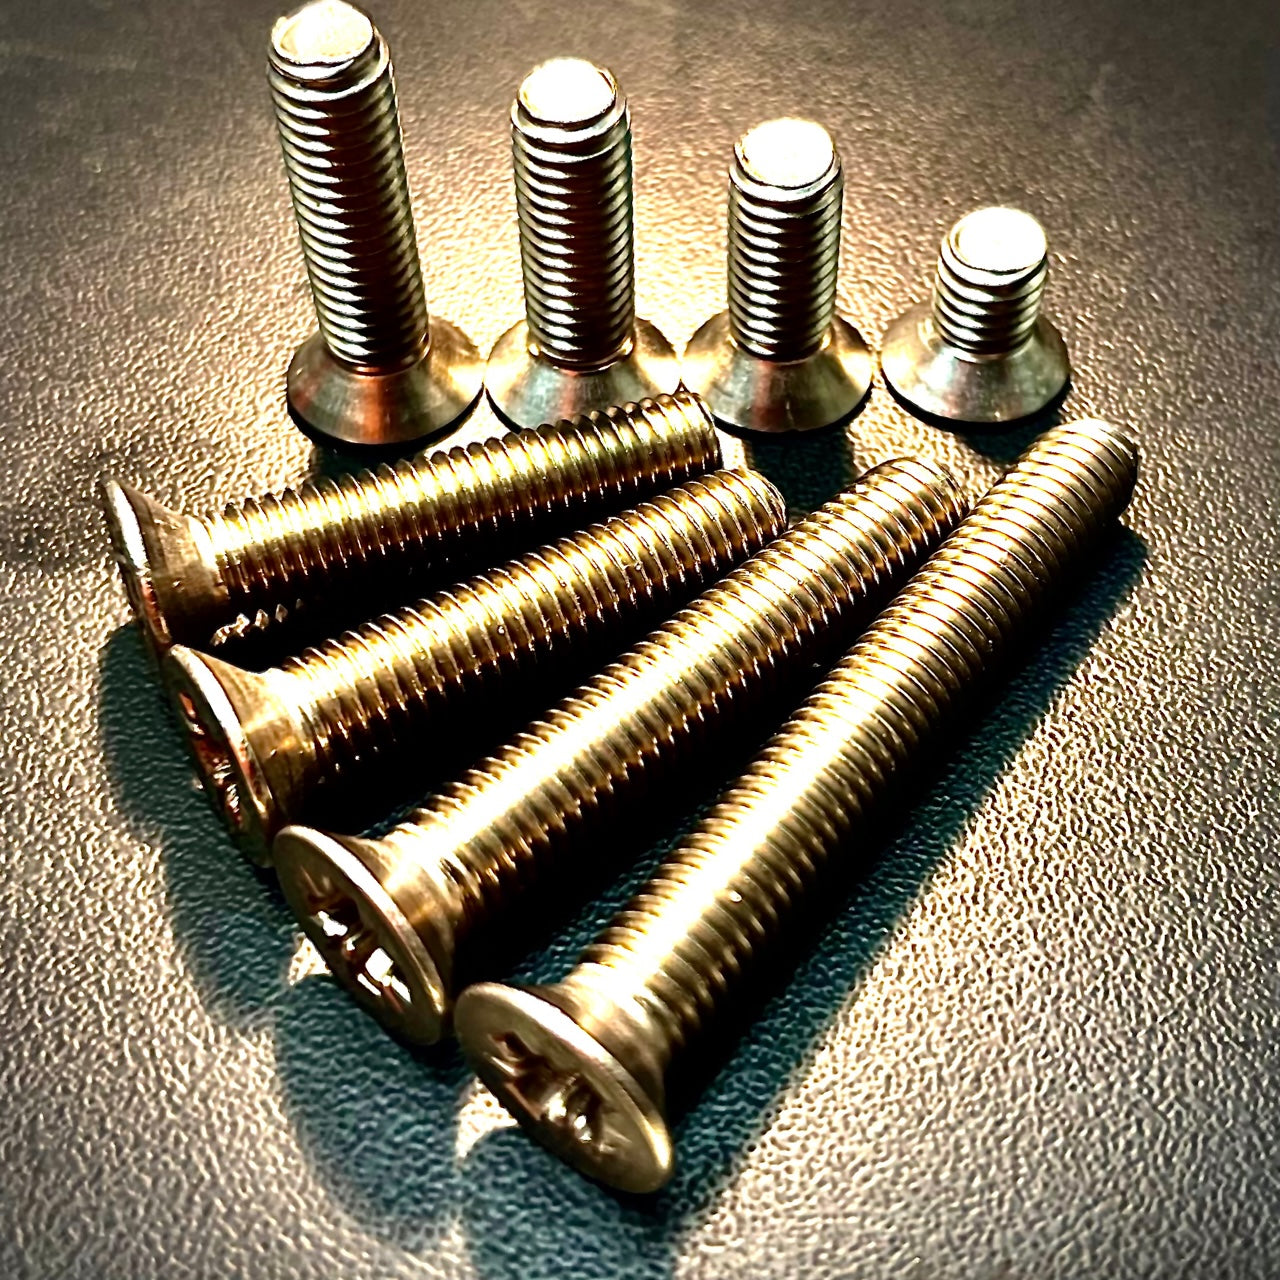 M8 Machine Screws Pozi Countersunk A2/304 Stainless Steel - Fixaball Ltd. Fixings and Fasteners UK